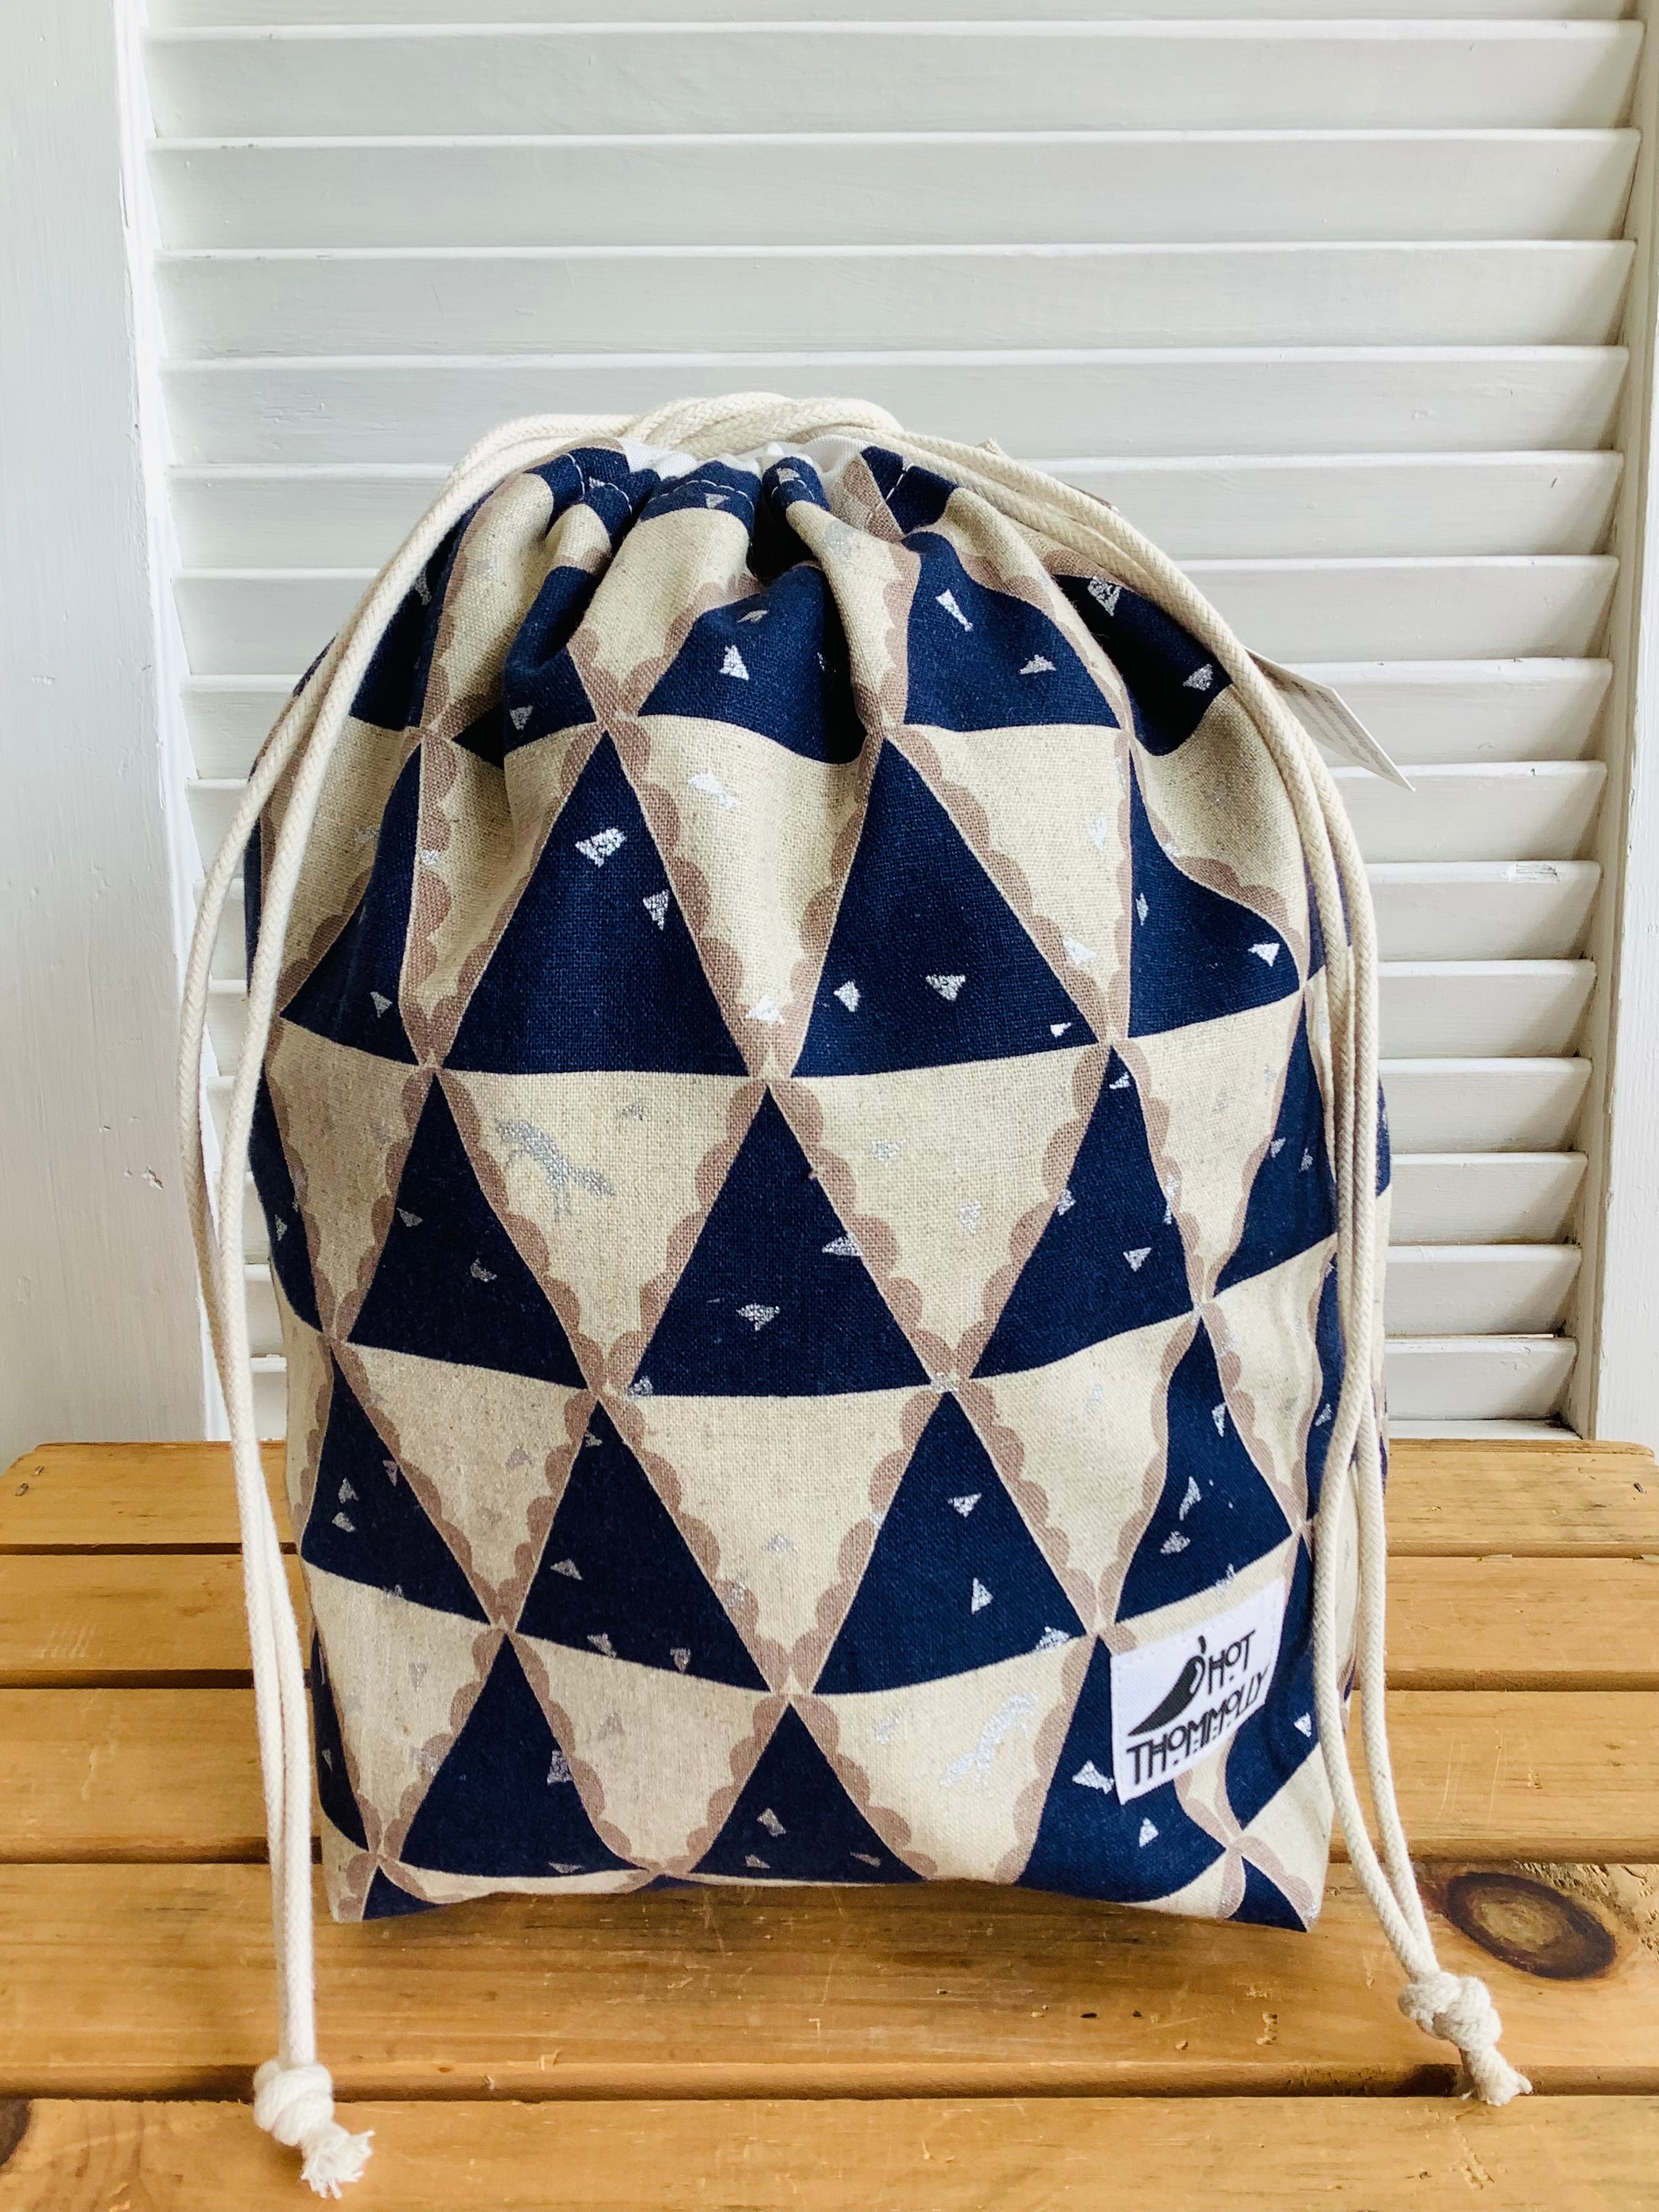 Drawstring Bags by Hot Thommolly